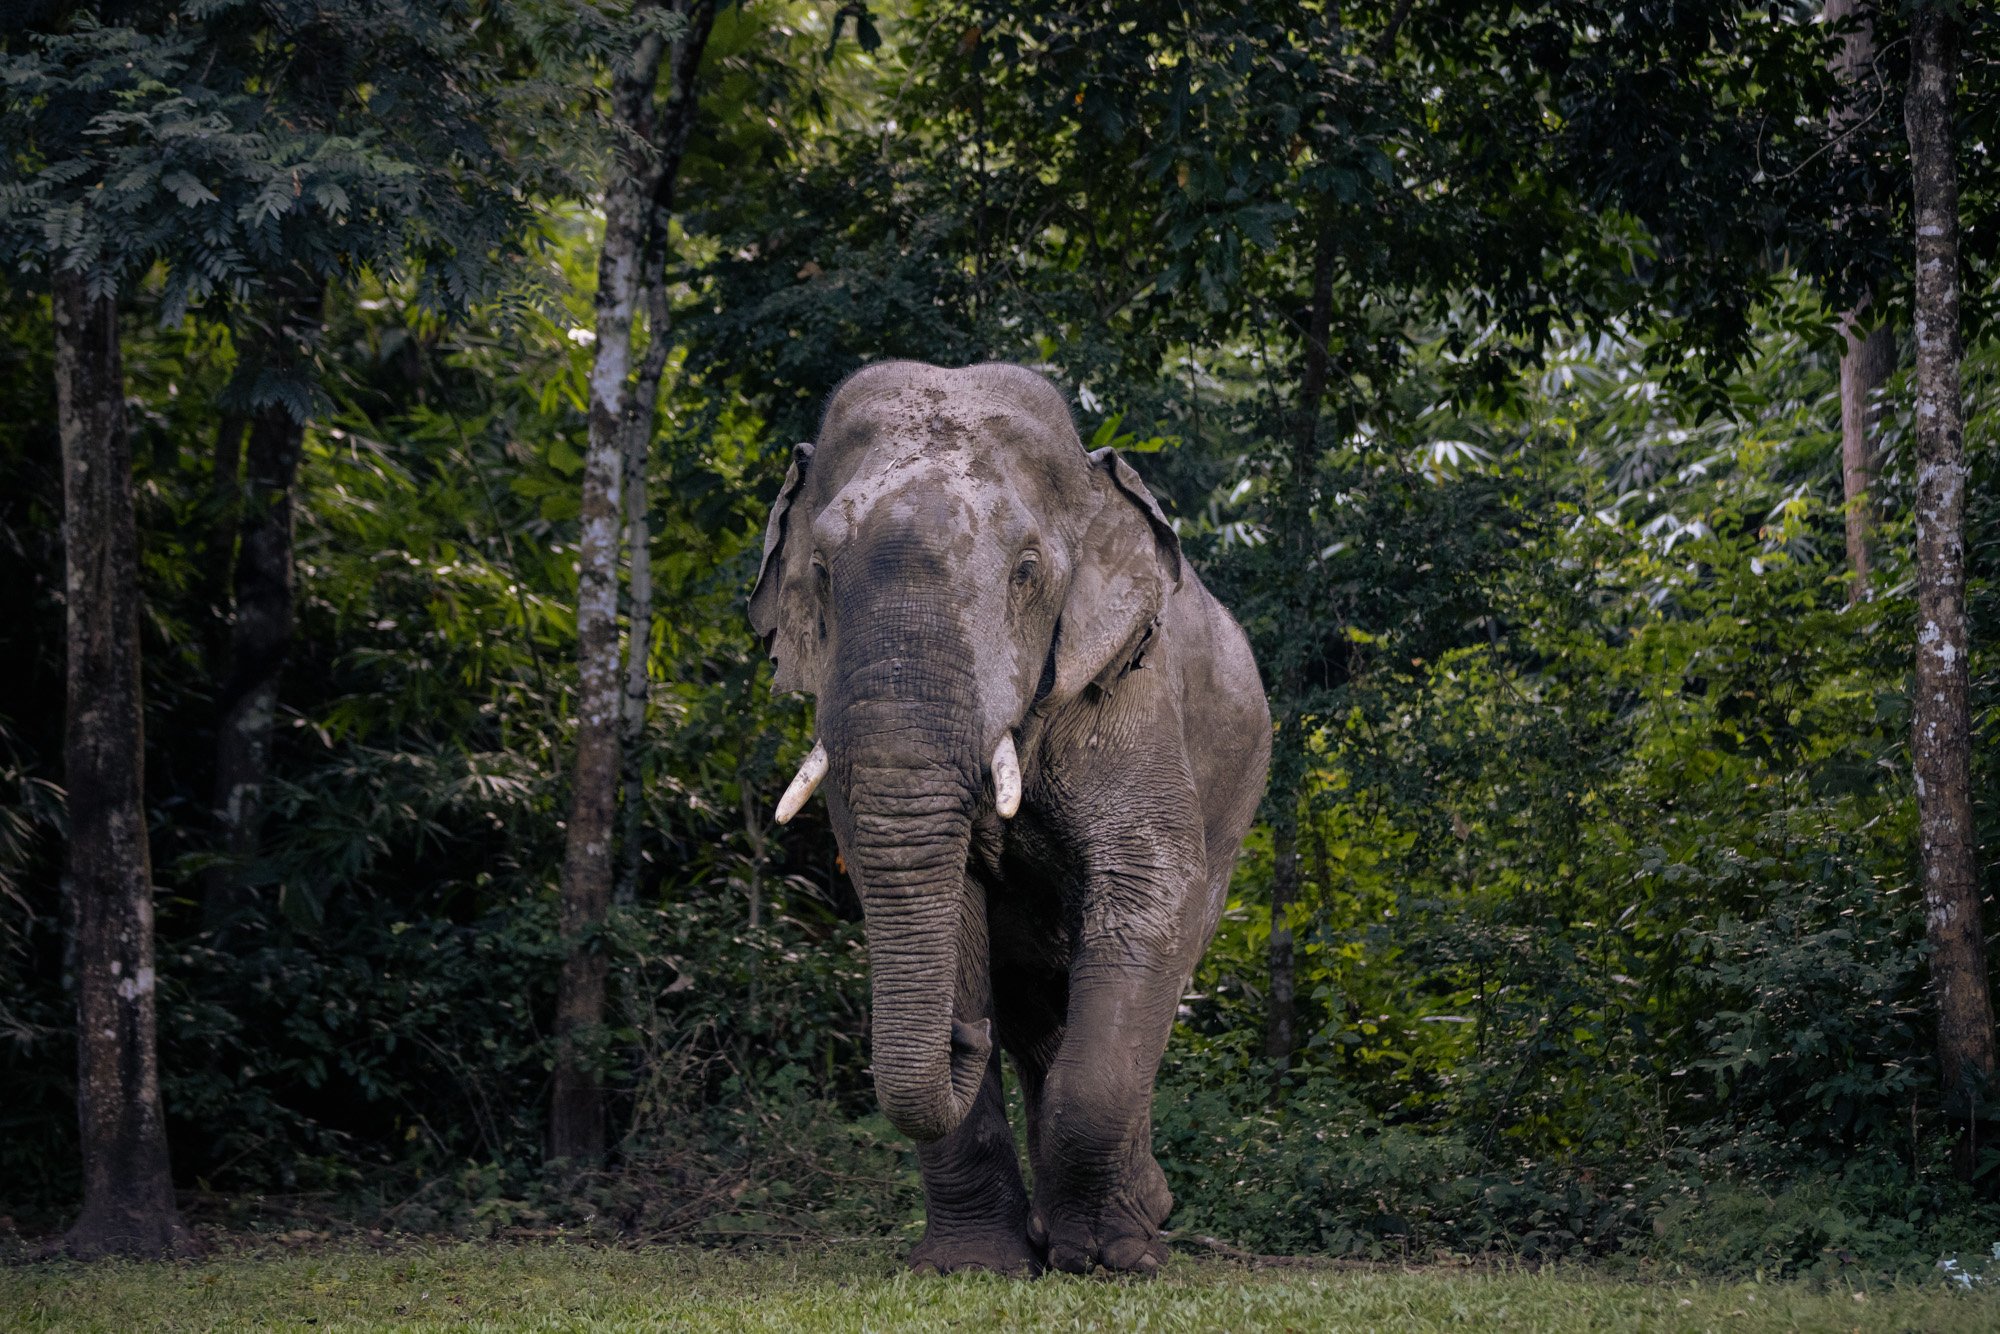  Boonchuay, a local bull from the nearby Kaeng Krachan national park emerges. 